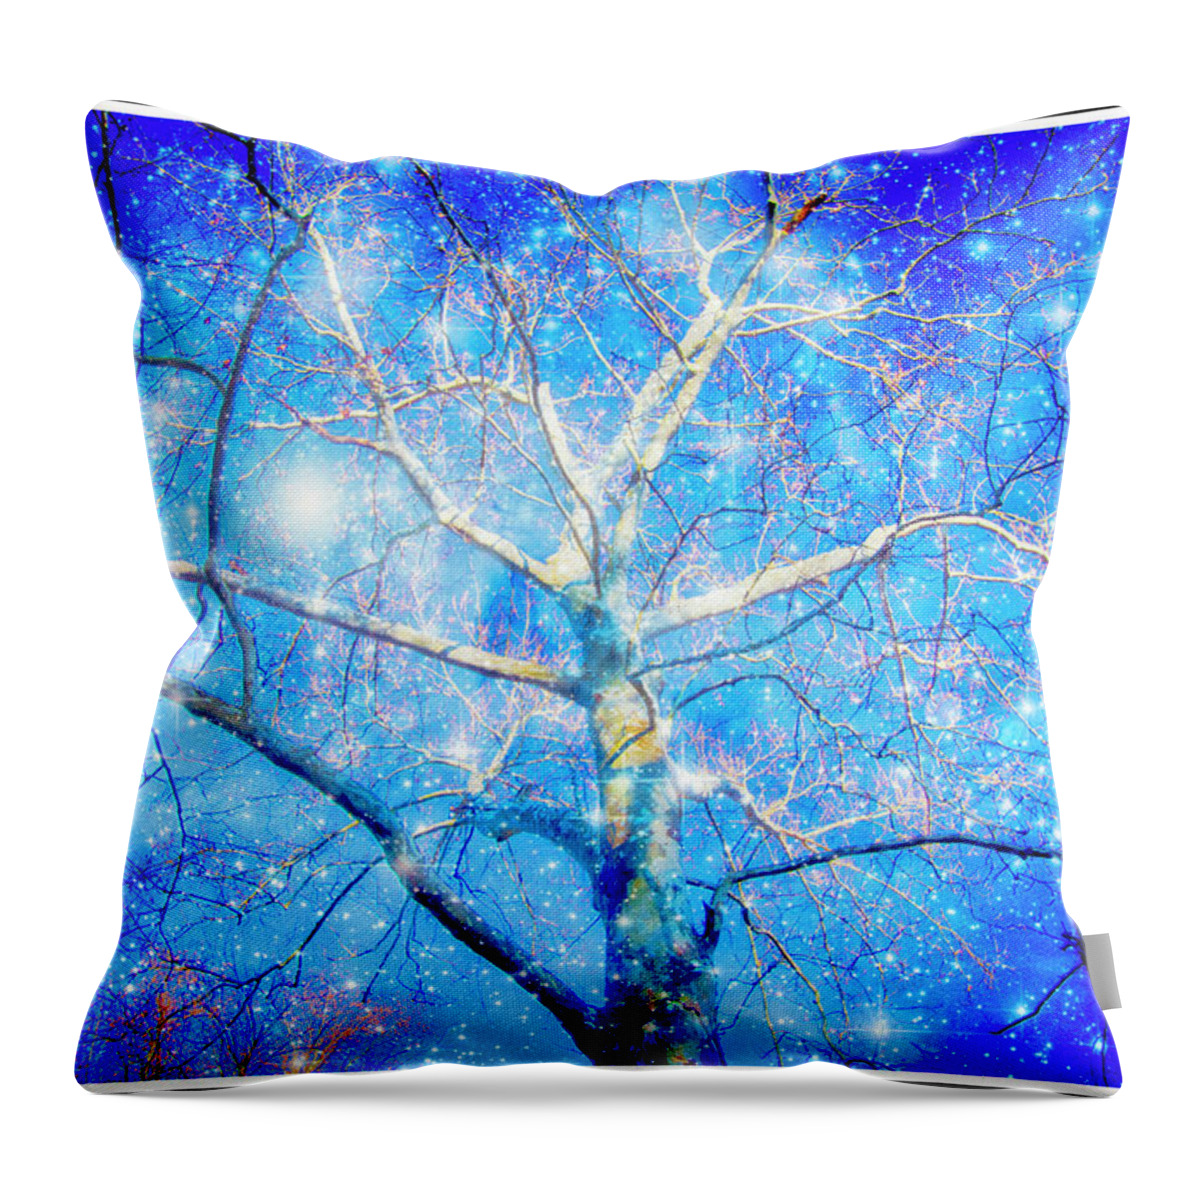 Spiritual Throw Pillow featuring the drawing Spirit Tree, Fantasy Forest by A Macarthur Gurmankin